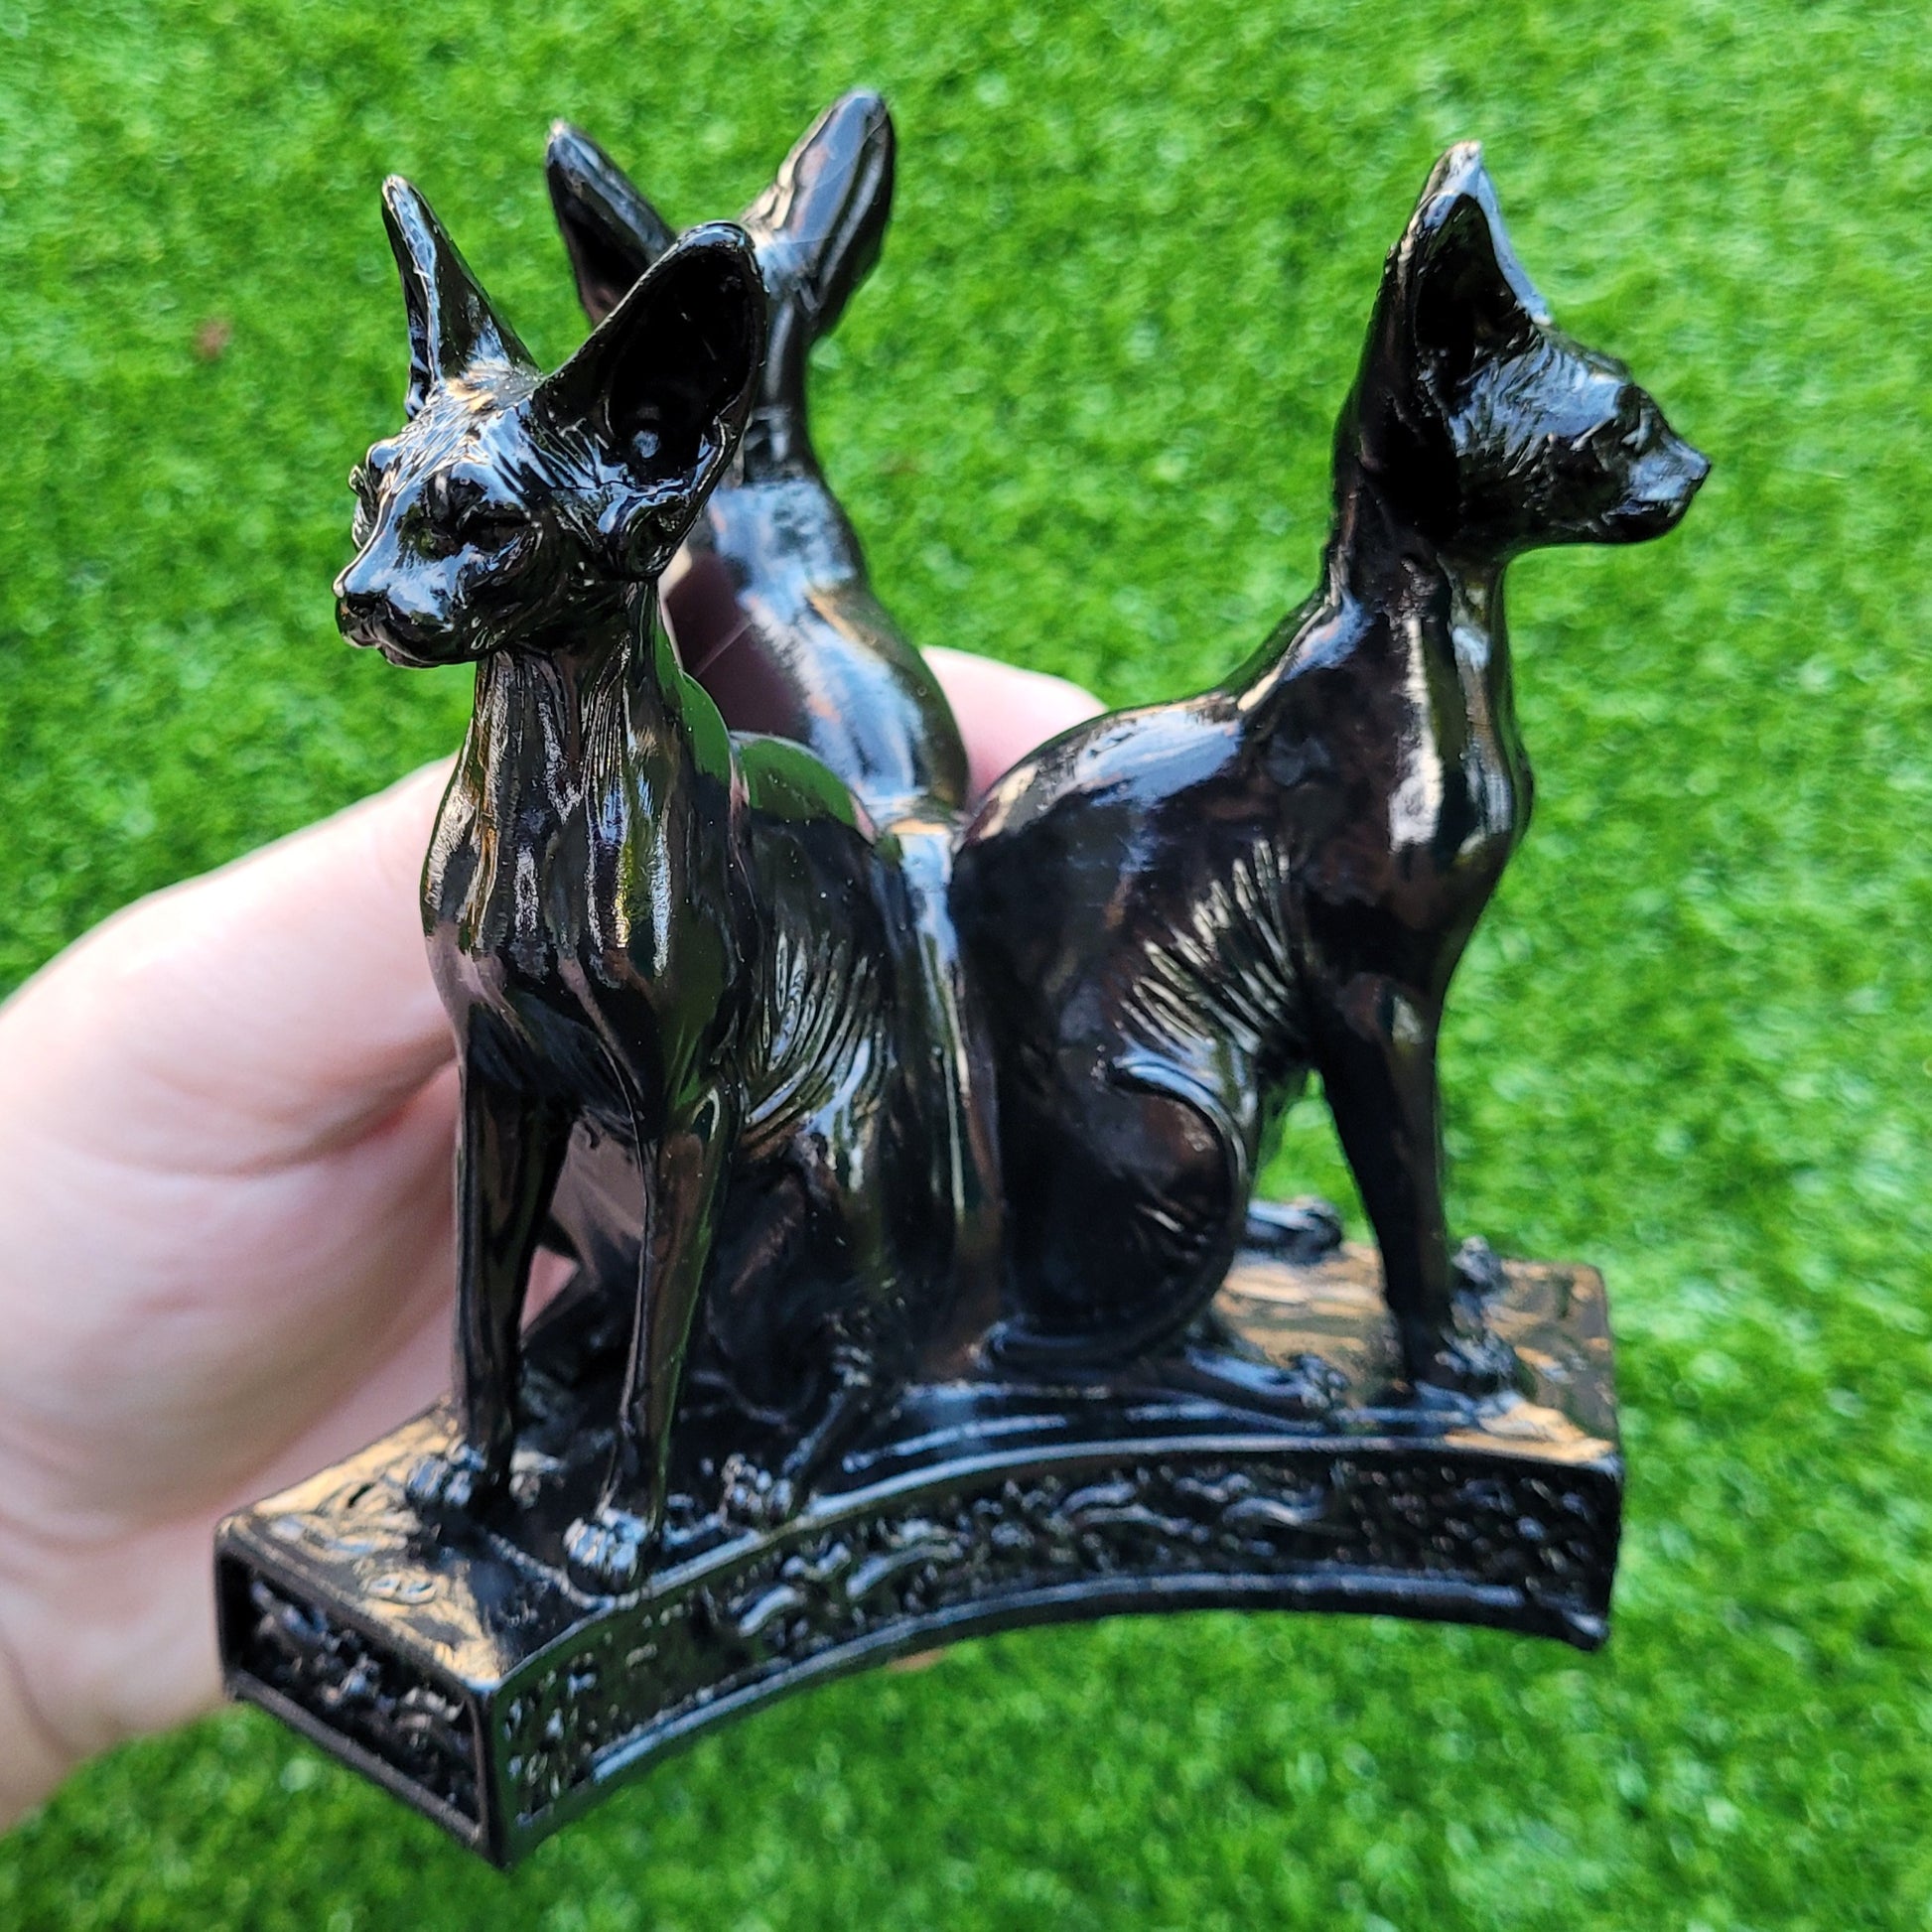 Egyptian Cat Sphere Display Stand in Purple or Black for Crystal Balls or Eggs 2" to 5" (51mm to 126mm)Egyptian Cat Sphere Display Stand in Purple or Black for Crystal Balls or Eggs 2" to 5" (51mm to 126mm)